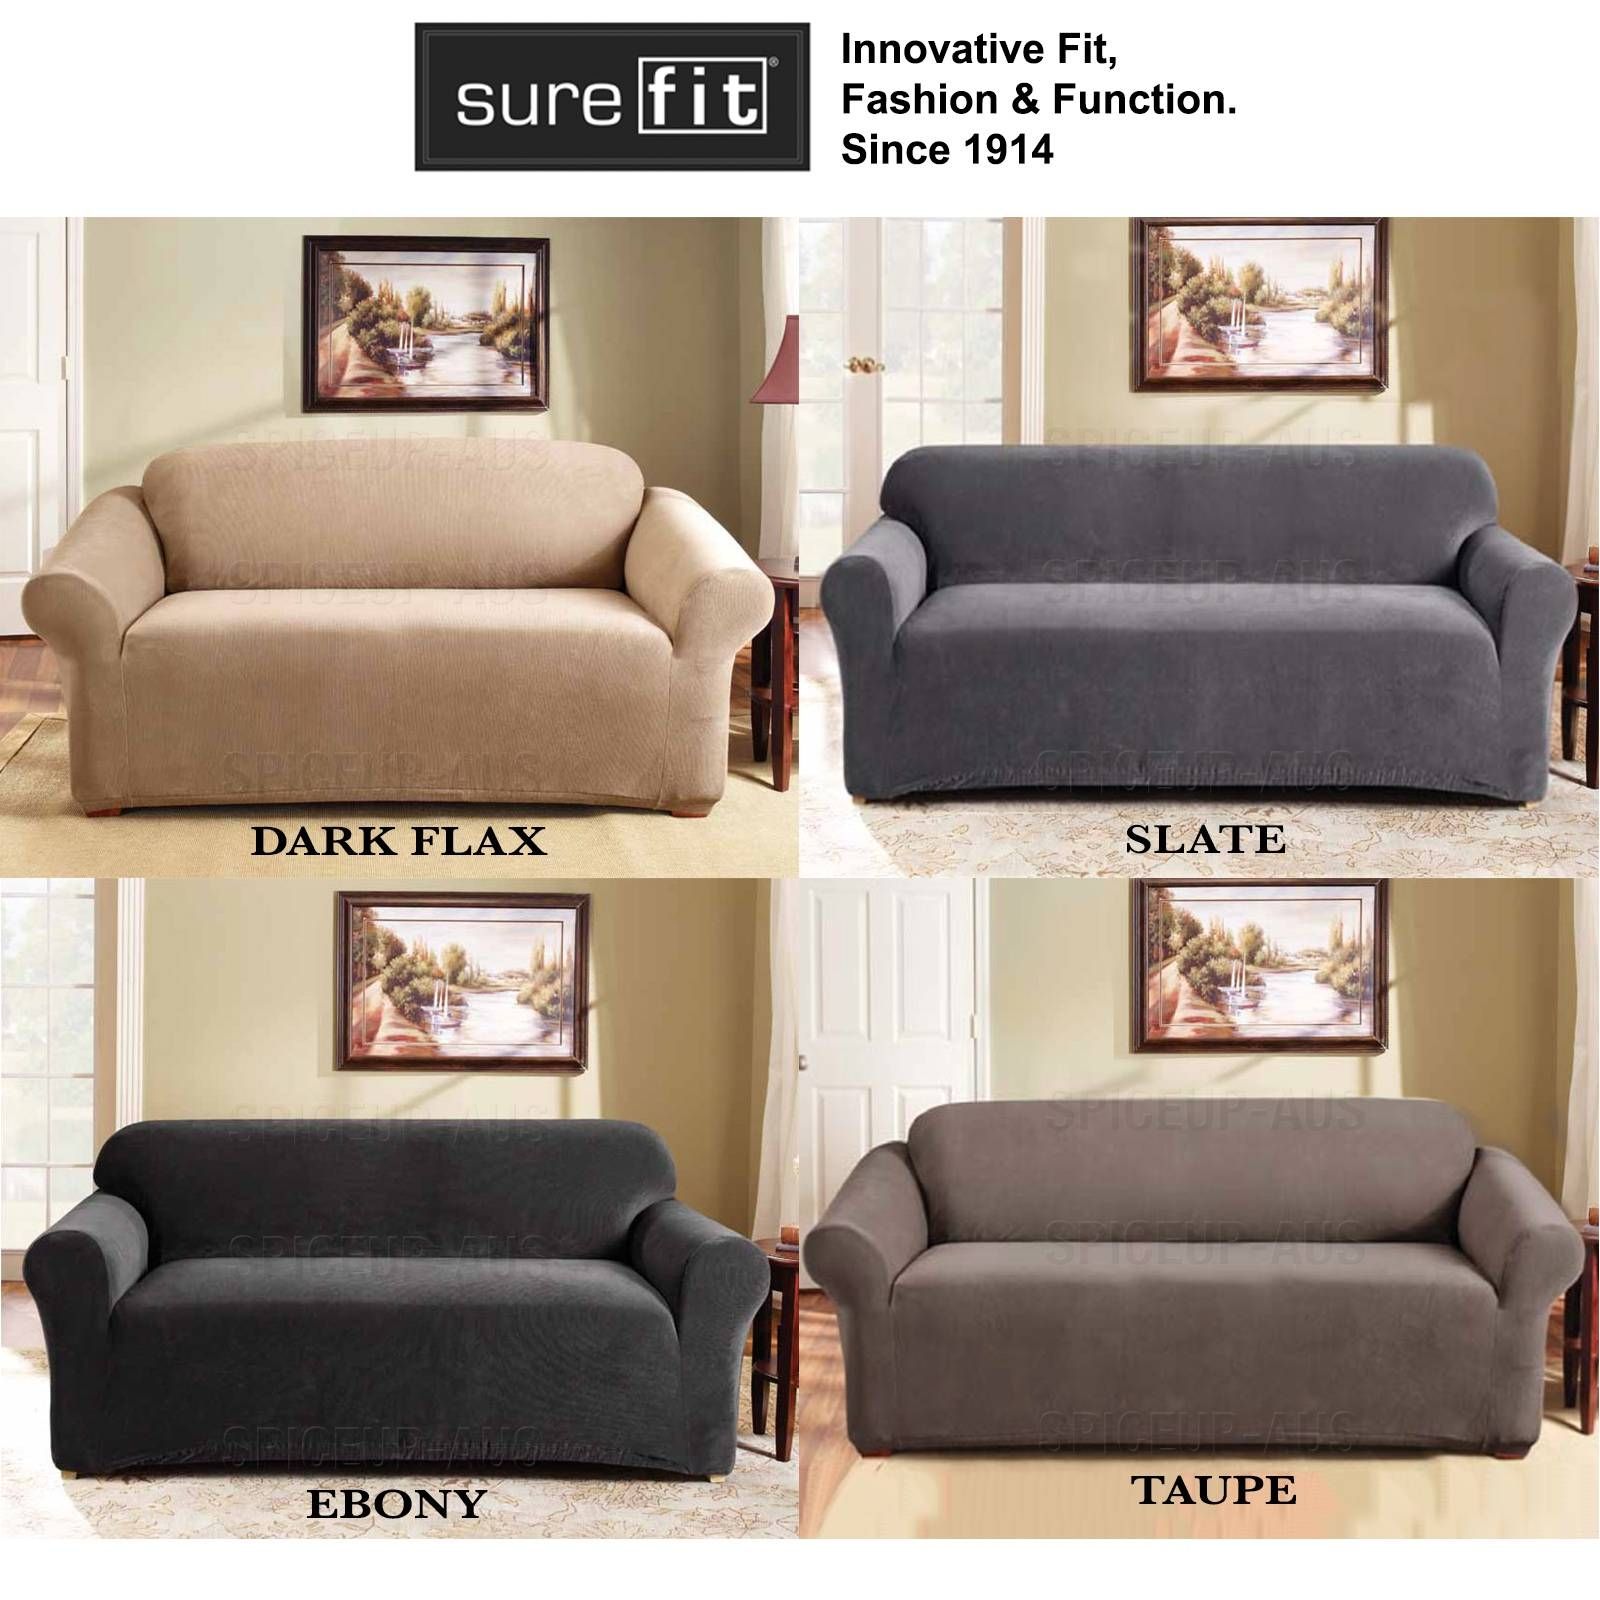 Decorating: Custom Sofa Slipcovers | Surefit | Couch Covers Throughout Stretch Slipcover Sofas (View 3 of 15)